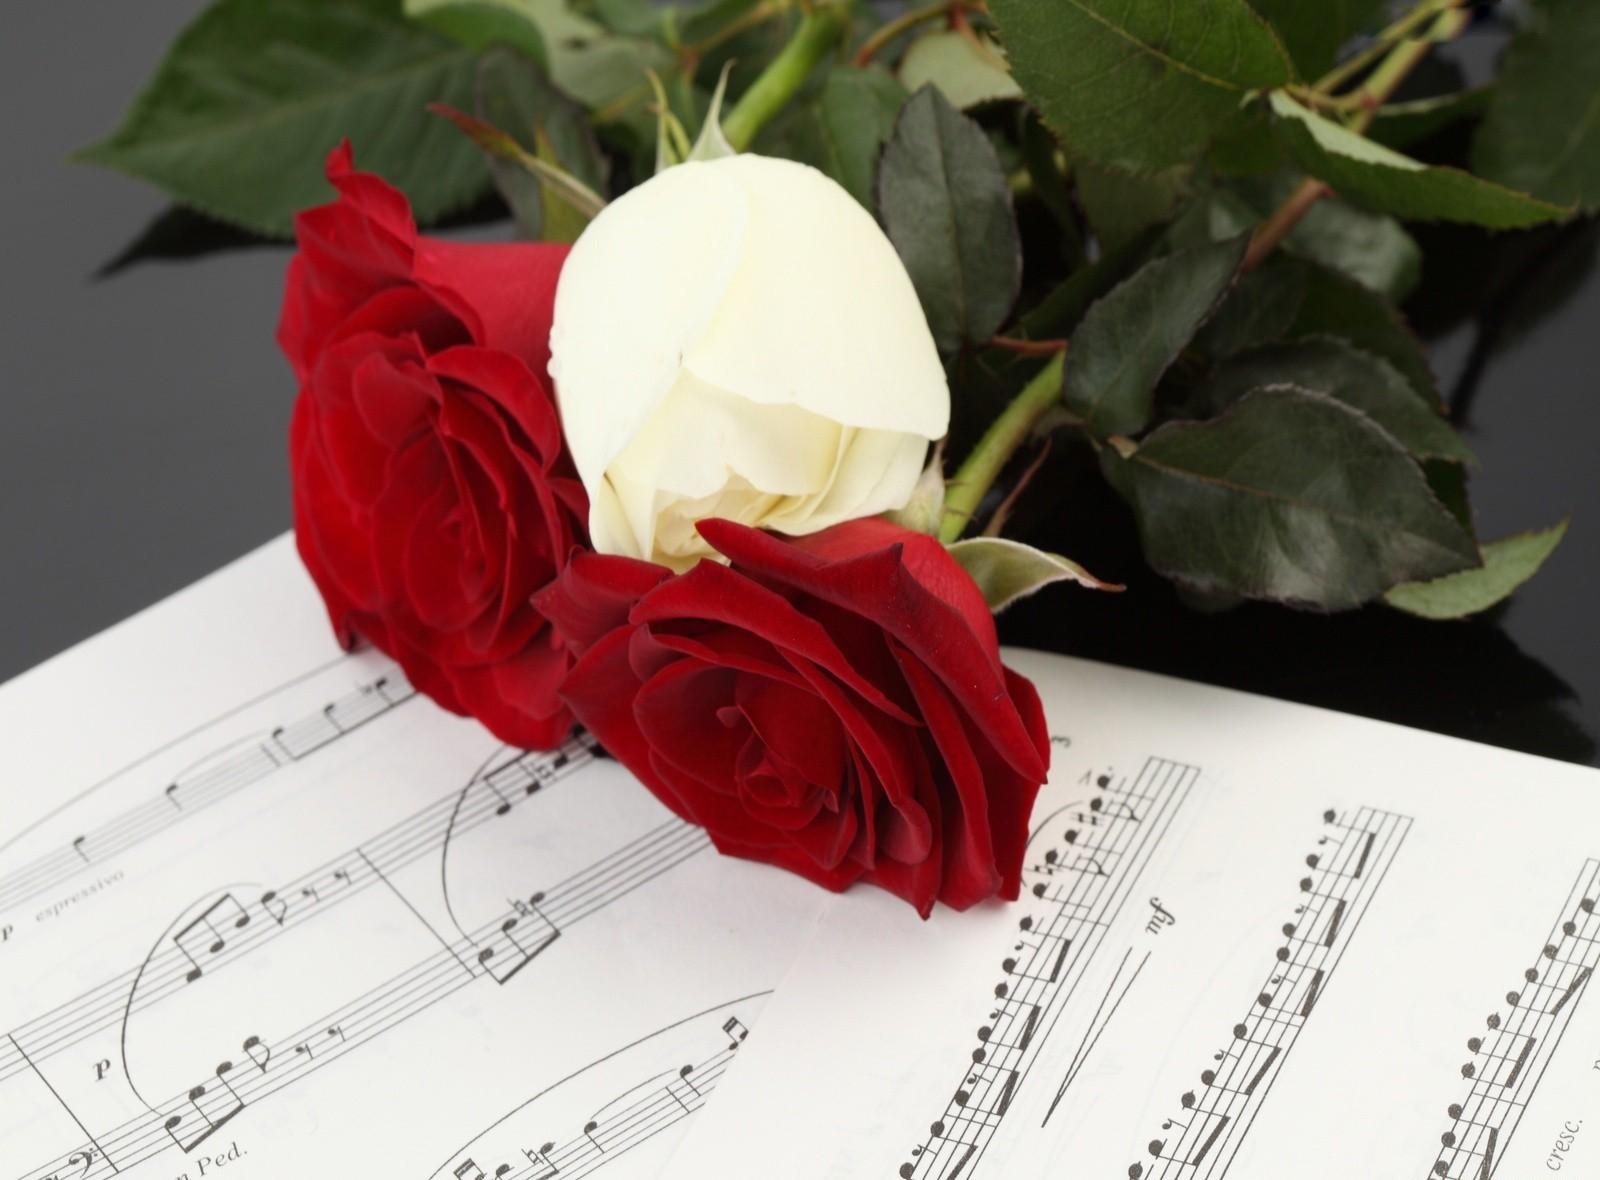 music, flowers, roses, three, notes